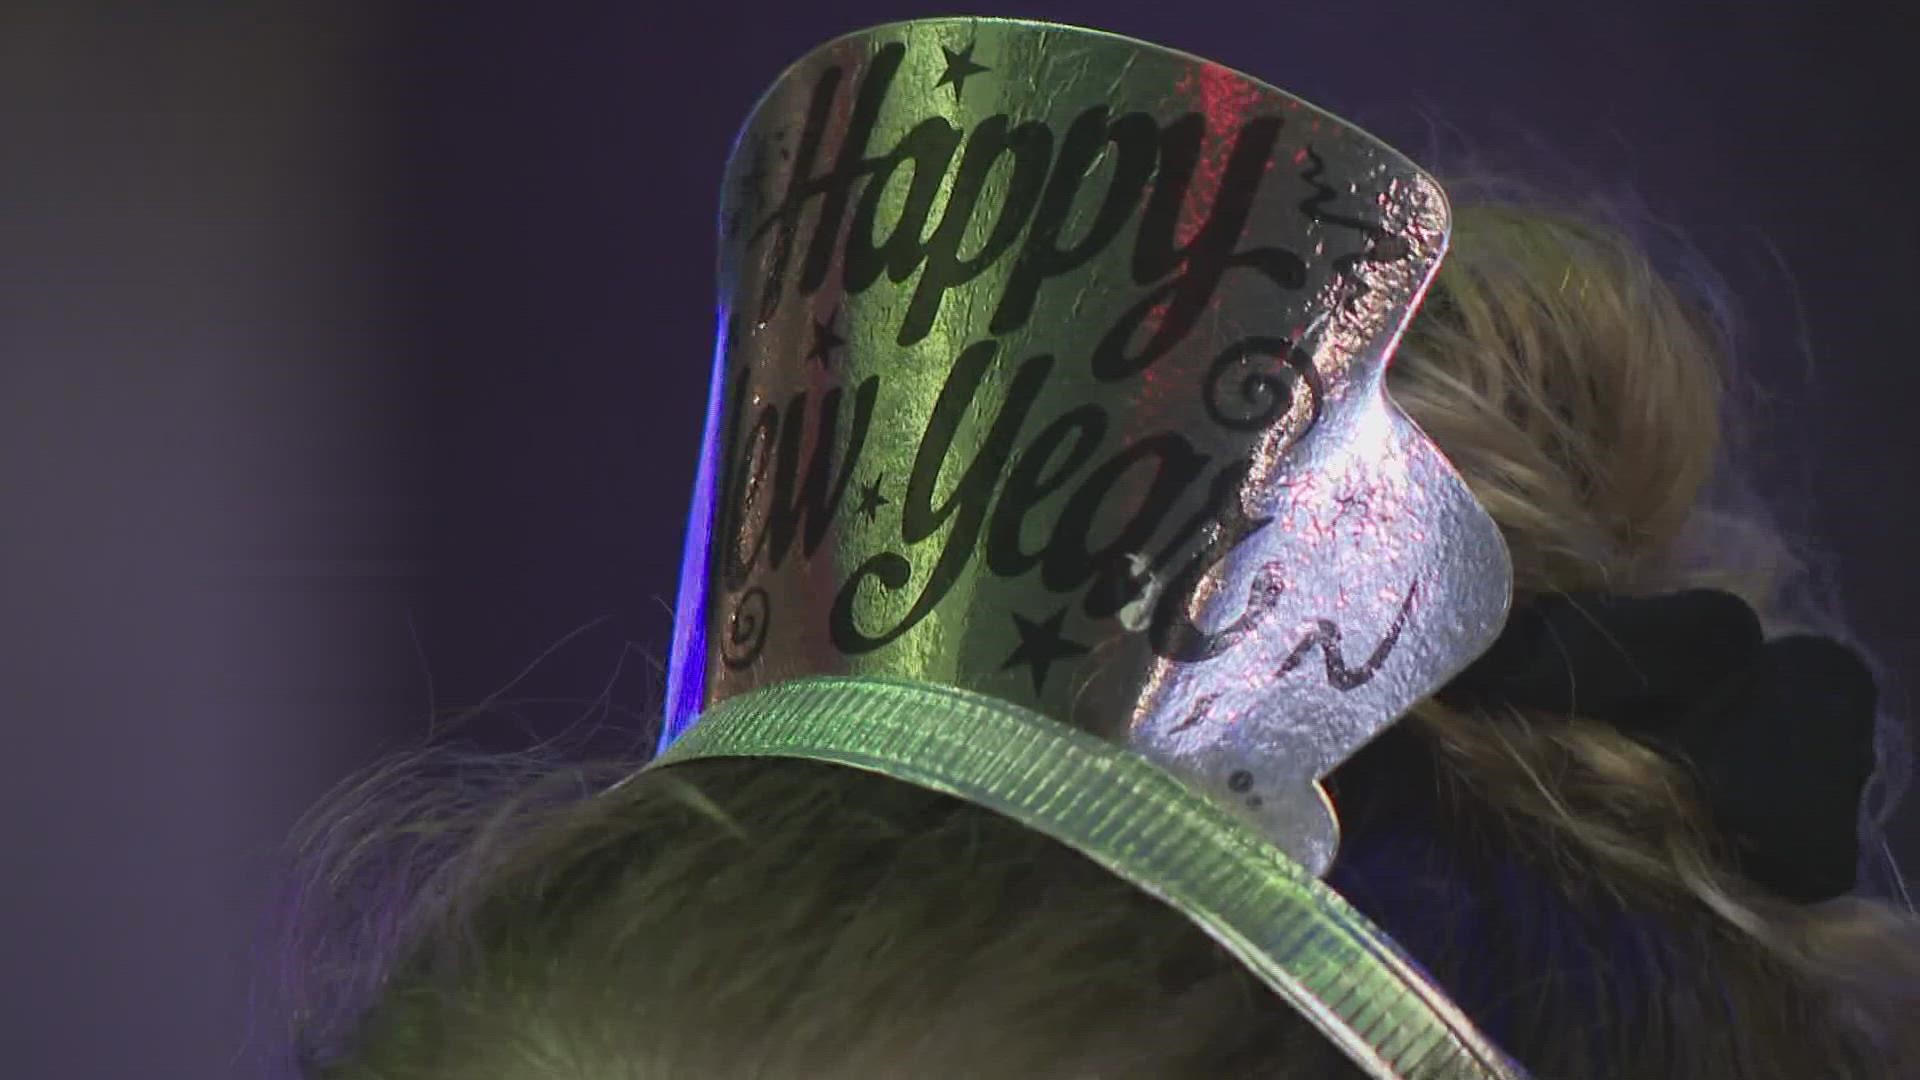 City Museum hosted its Family Friendly New Year's Eve party from 5-9 p.m. Saturday. This celebration was a safe and sober space for all families to celebrate.